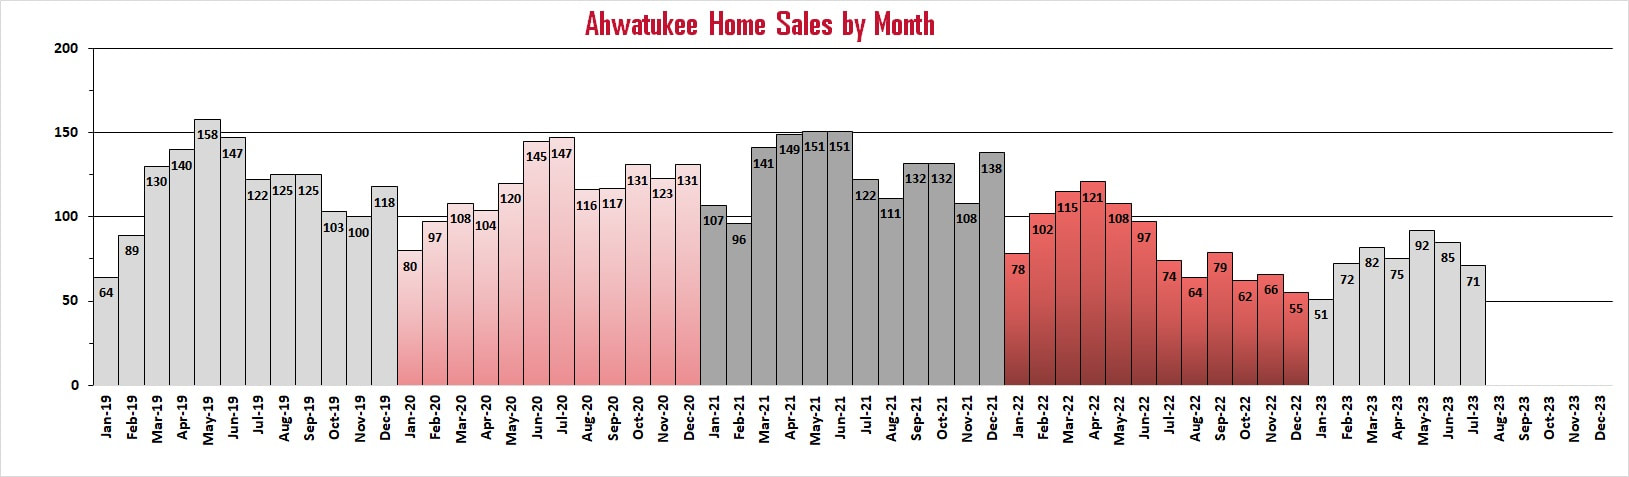 Ahwatukee Market Reports - Home Sales by Month | Troy Erickson Realtor